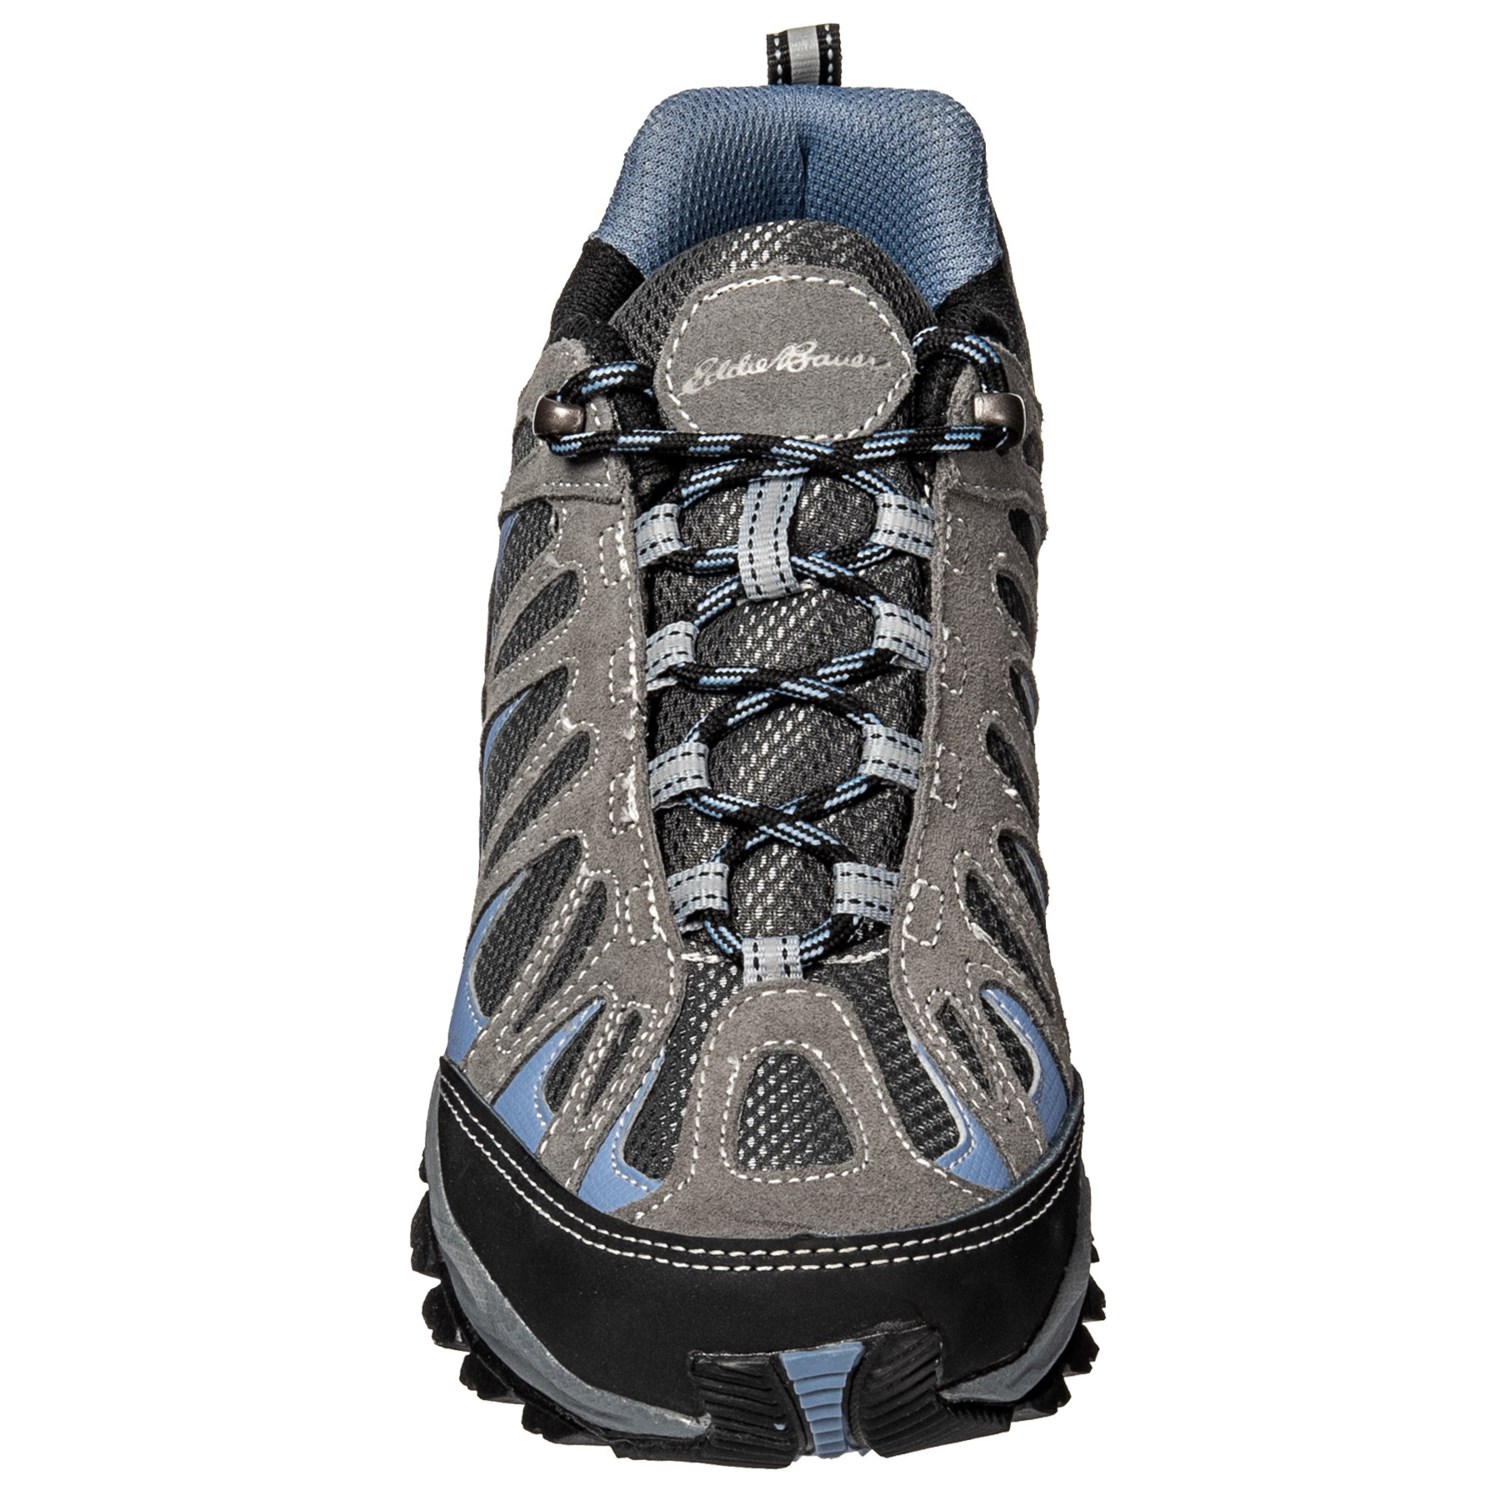 eddie bauer hiking shoes review